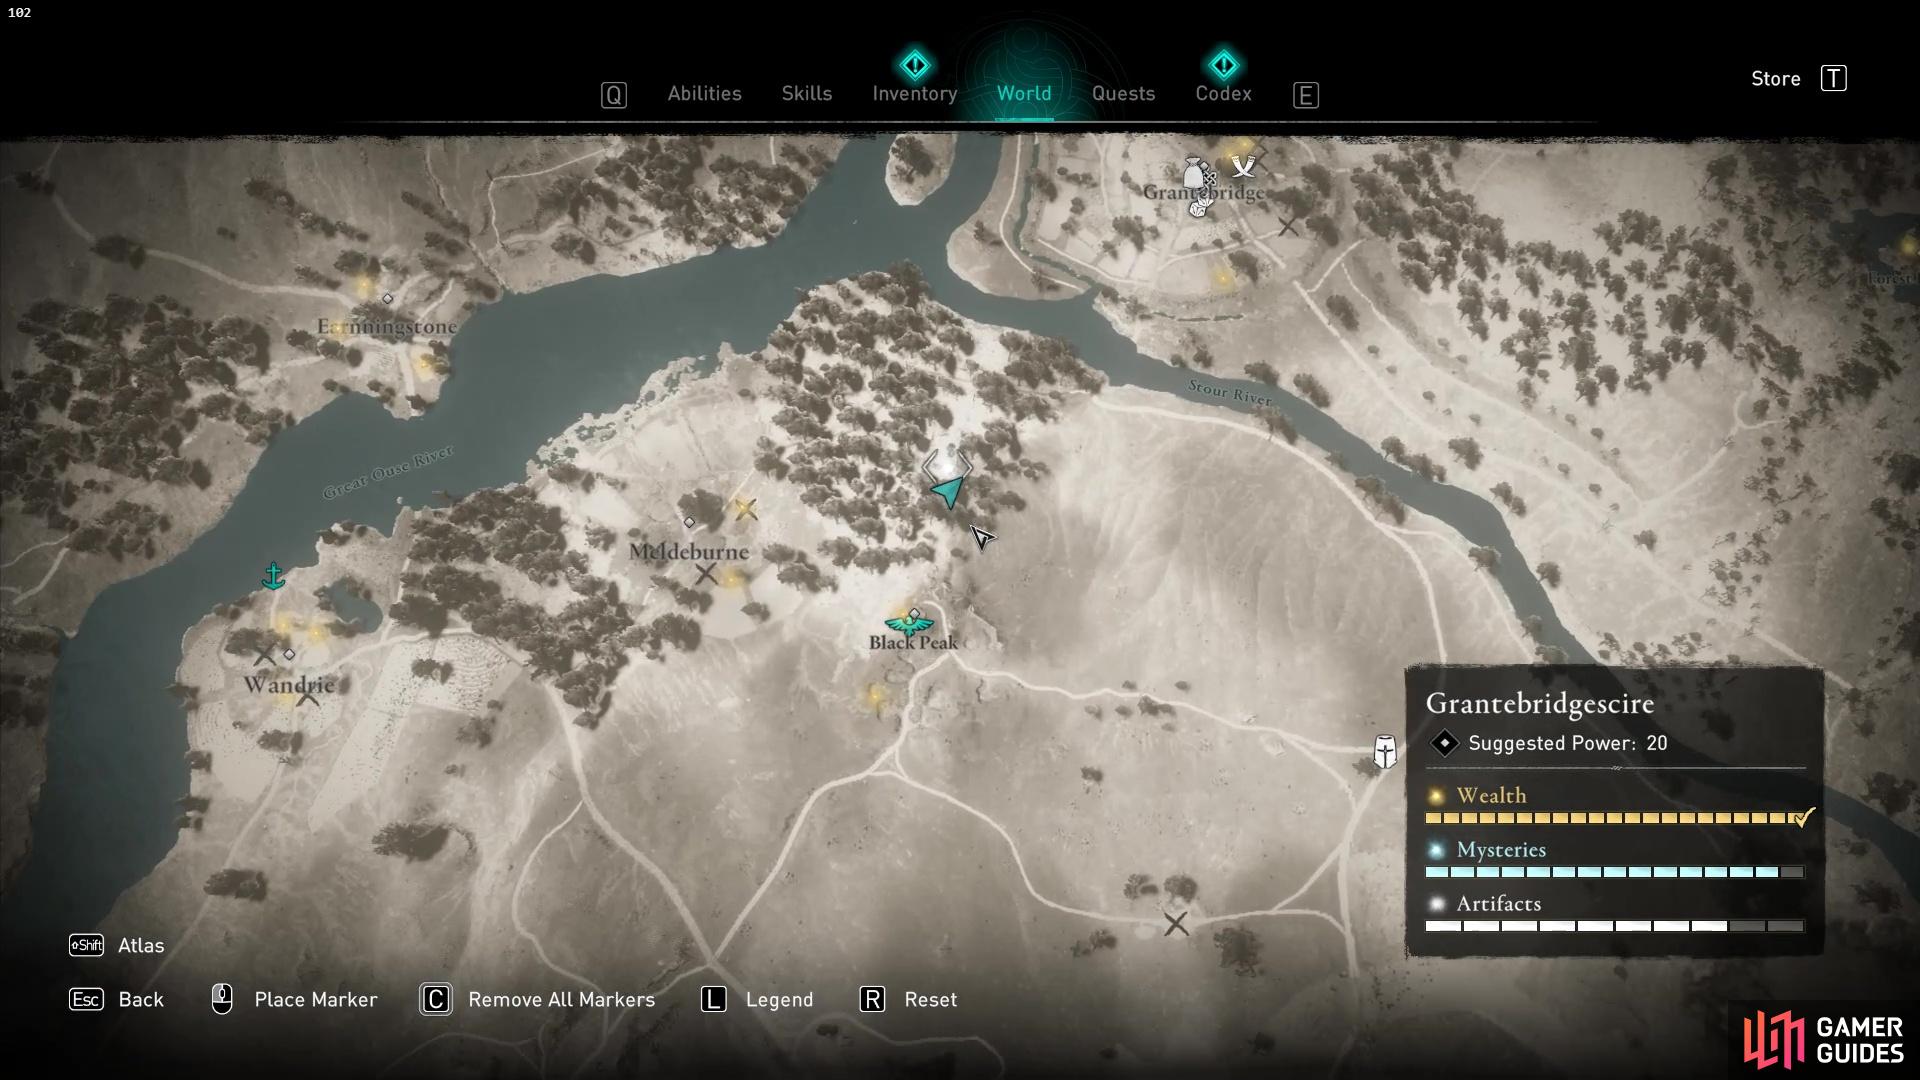 A Roman Artifact can be found north of Black Peak